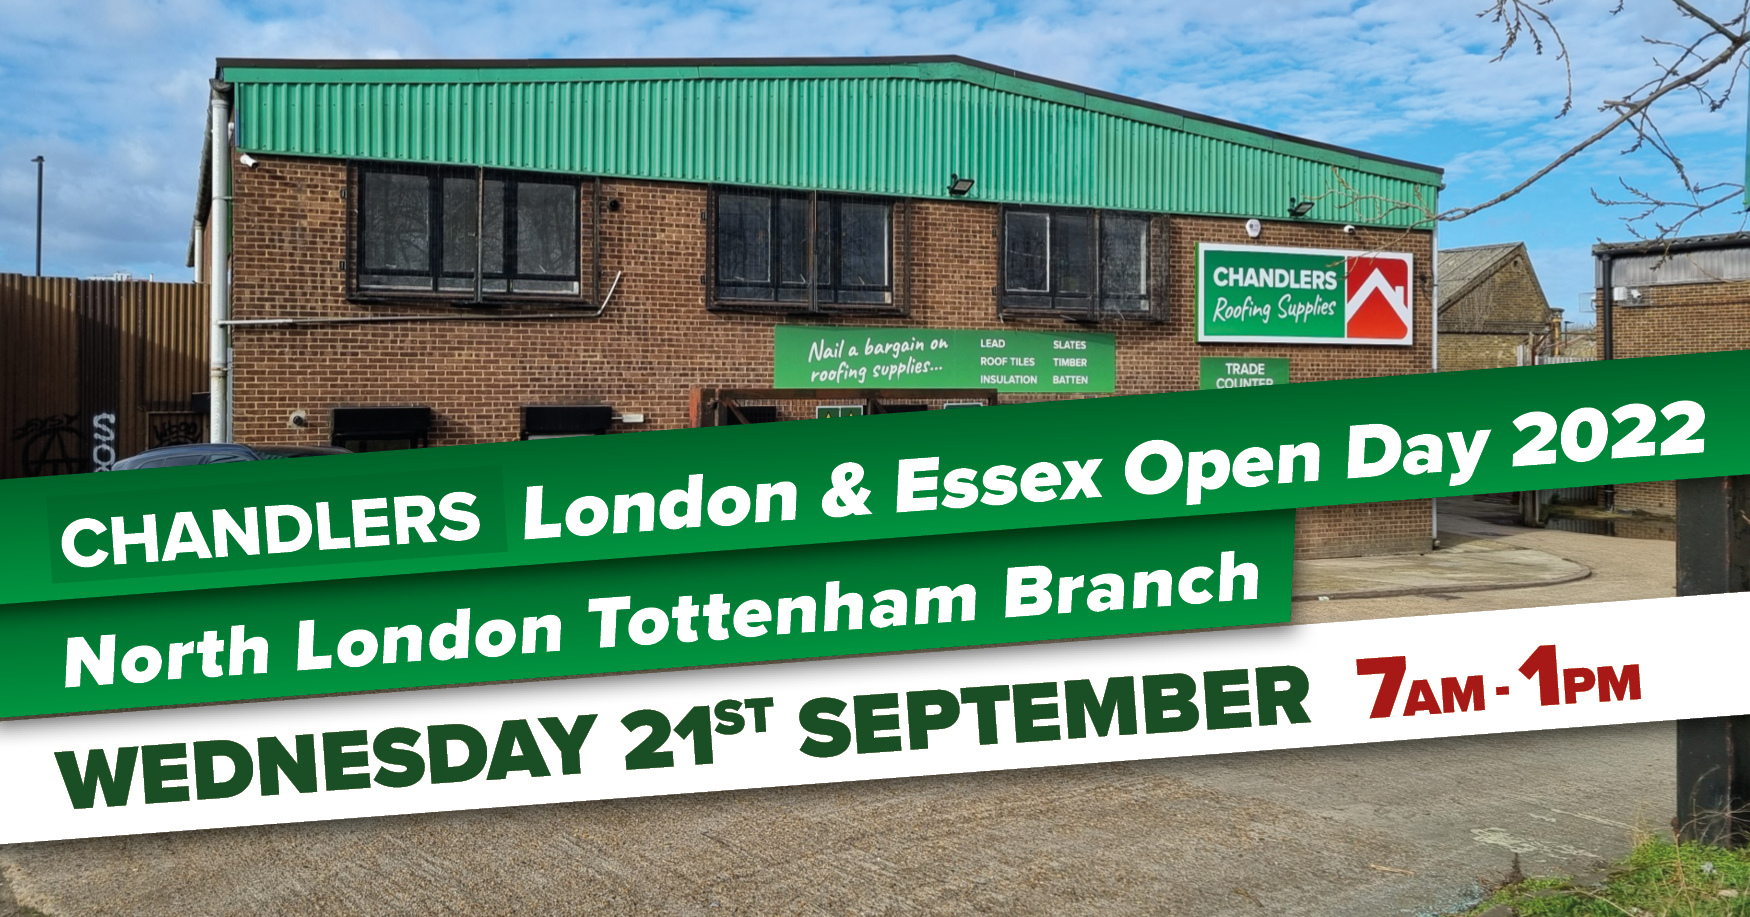 Join Us at Our London & Essex Open Day!